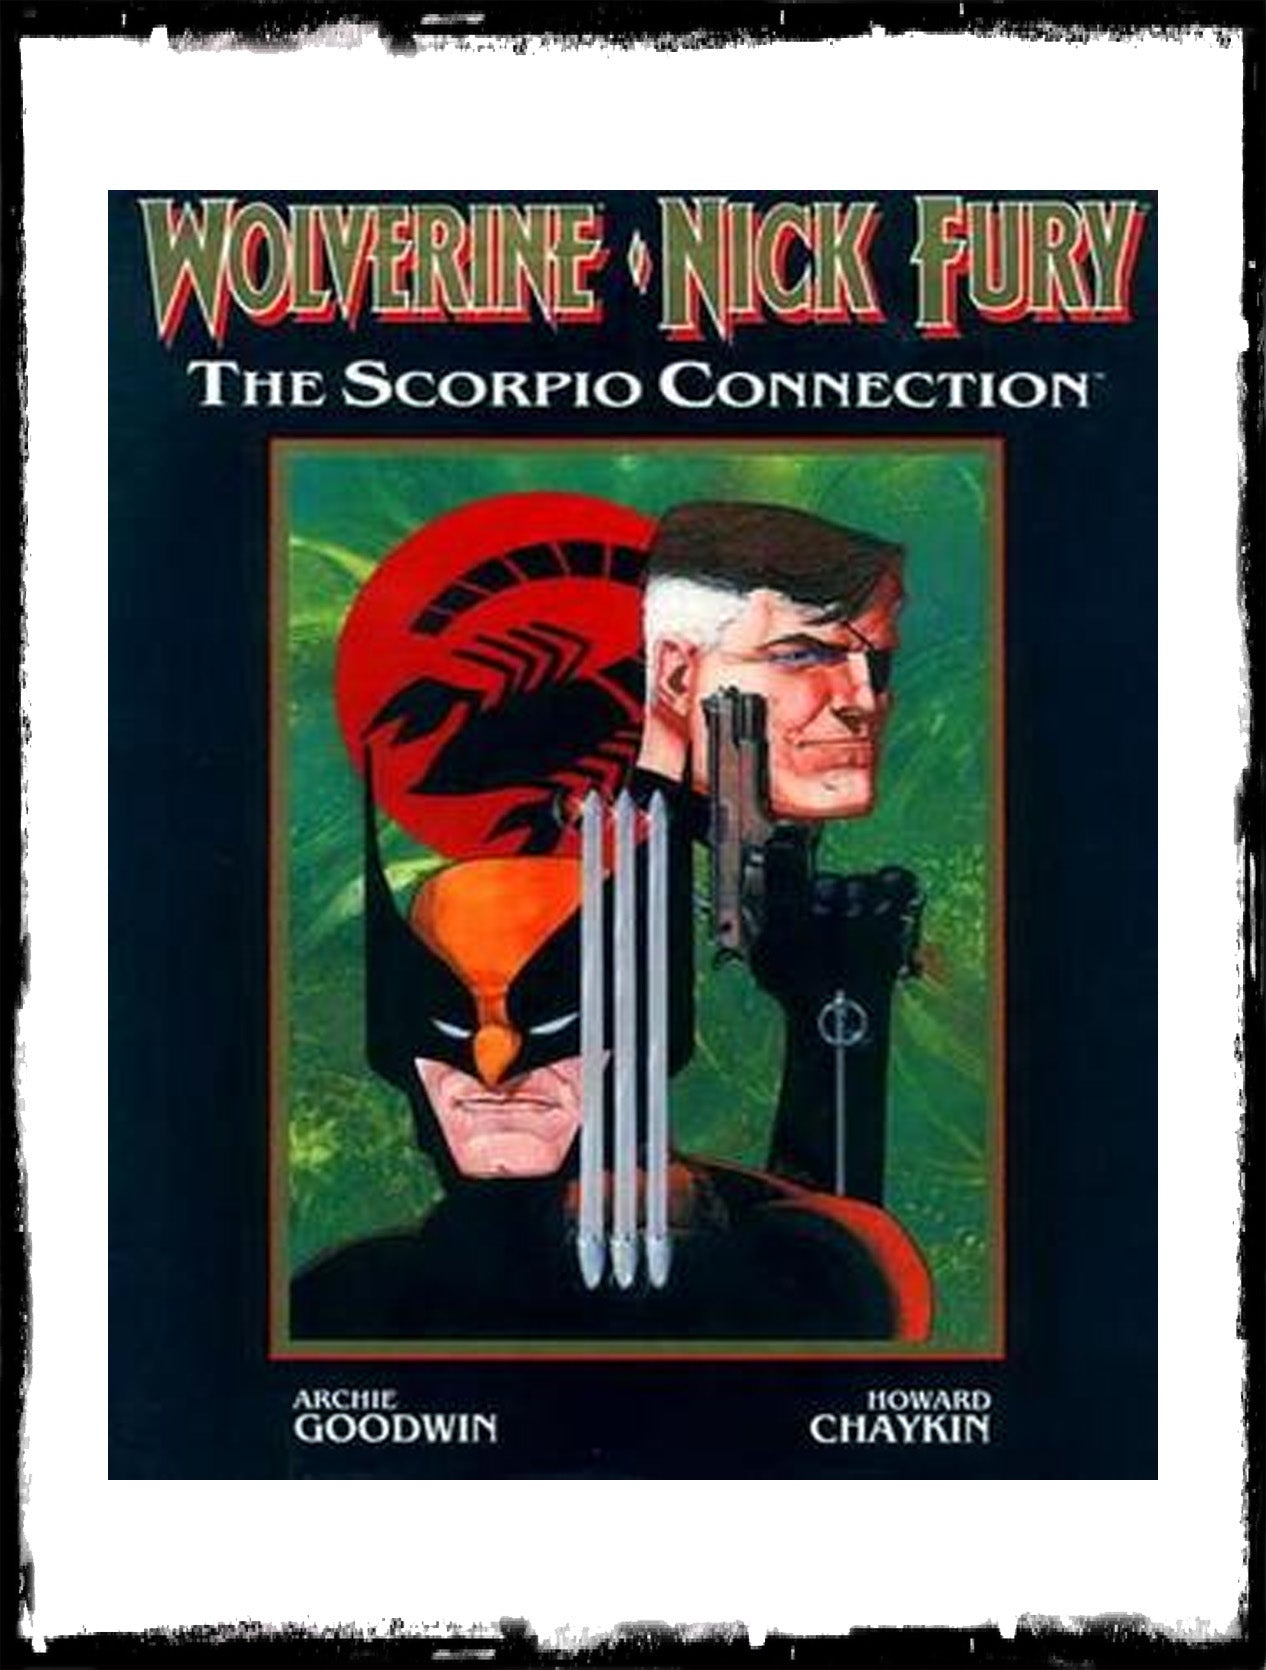 WOLVERINE/NICK FURY: THE SCORPIO CONNECTION - 1989 - NM OUT OF PRINT HARDCOVER!